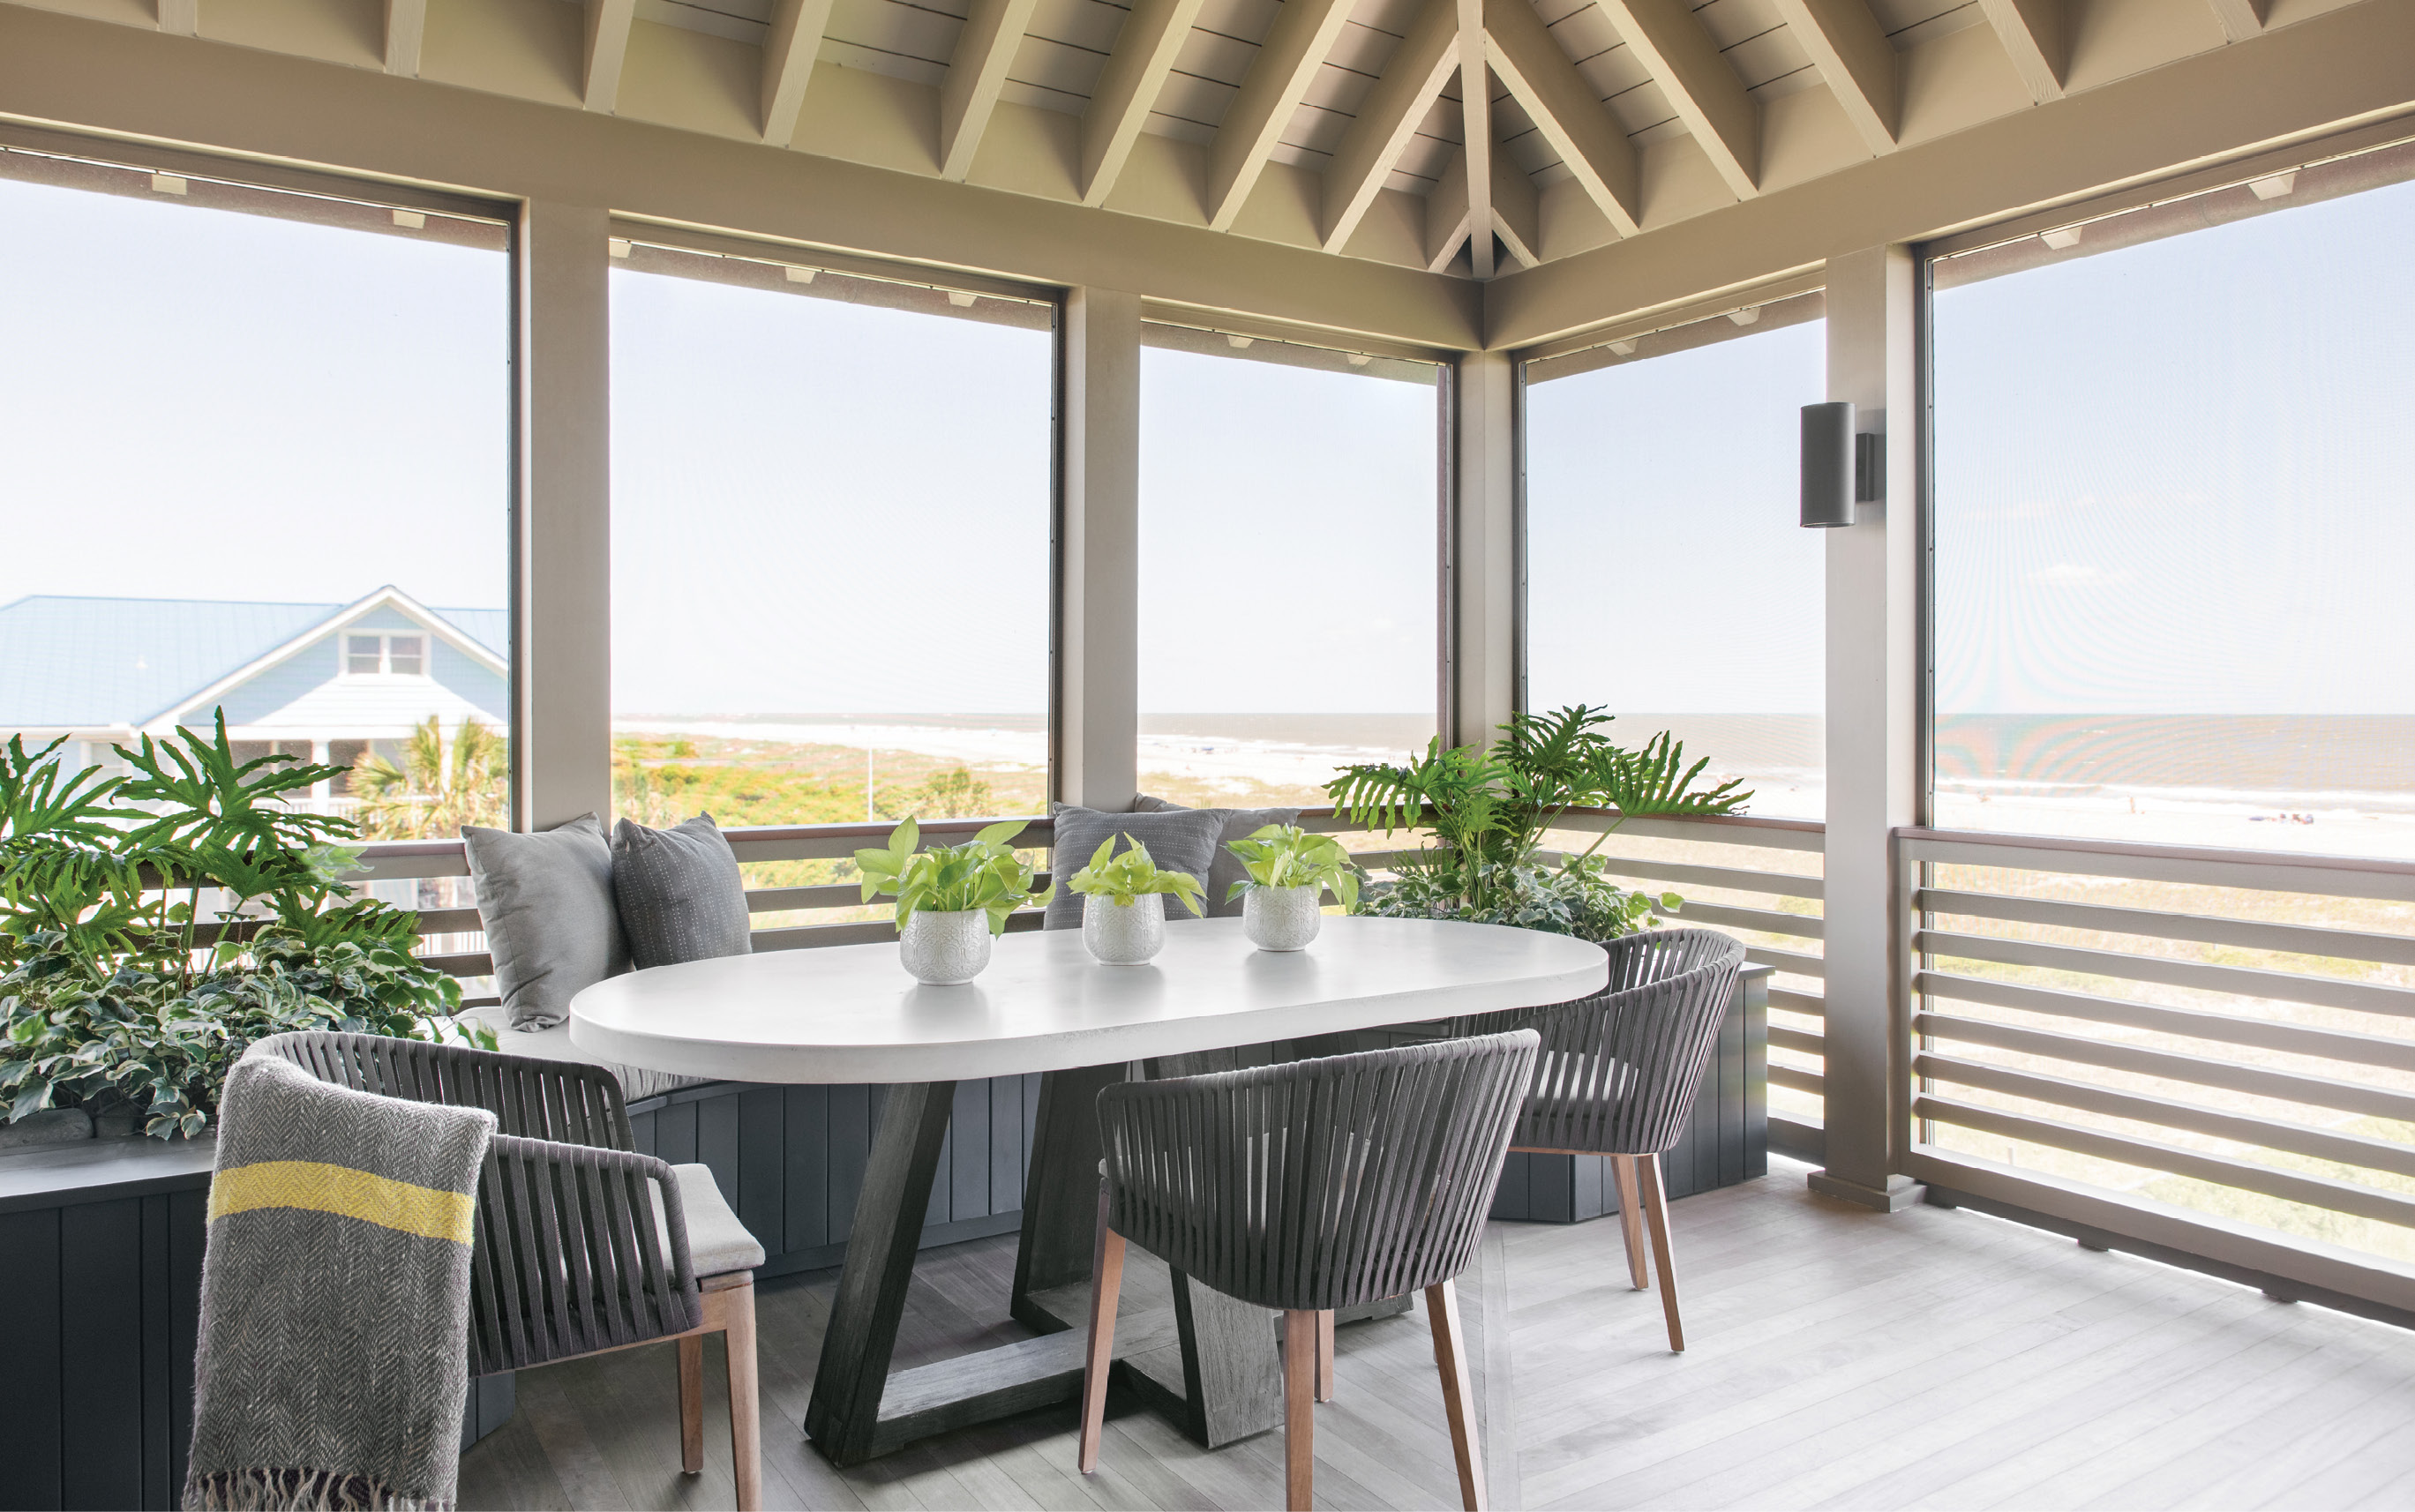 Viewfinder: With multiple porches, there’s always somewhere to sit and soak up the views. But the dining porch, complete with a custom oval concrete and elm table by Clubcu and JANUS et Cie Mood chairs, tops them all.